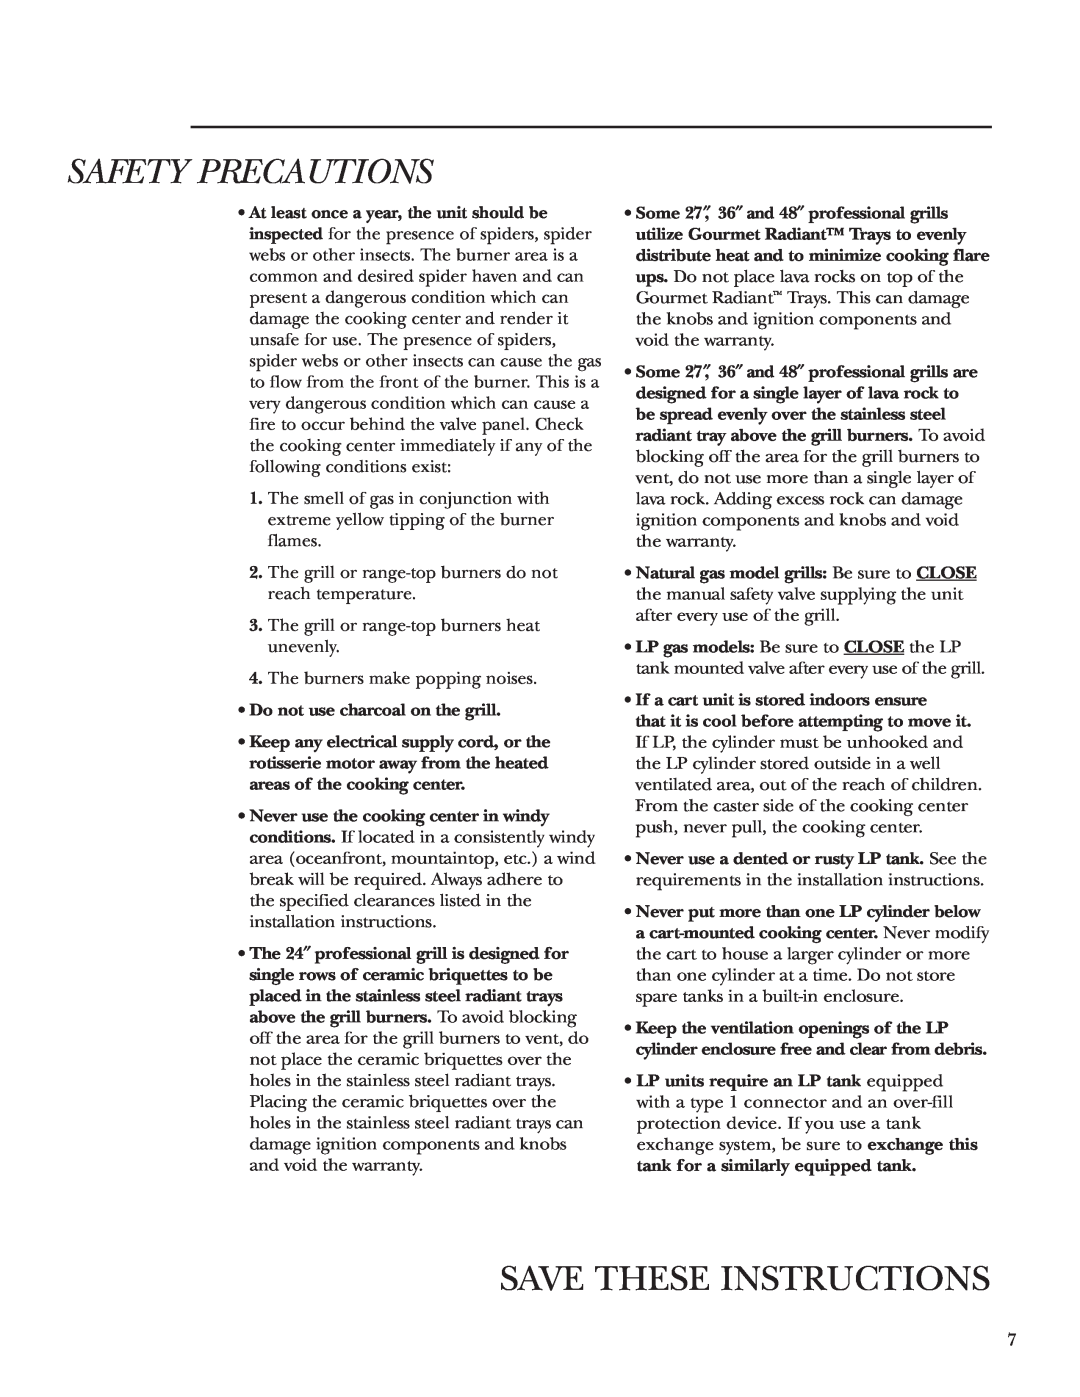 GE ZGG27N20, ZGG48N31, ZGG48N30, ZGG48L30, ZGG48L42, ZGG36N21, ZGG36N20, ZGG48L31 Safety Precautions, Save These Instructions 